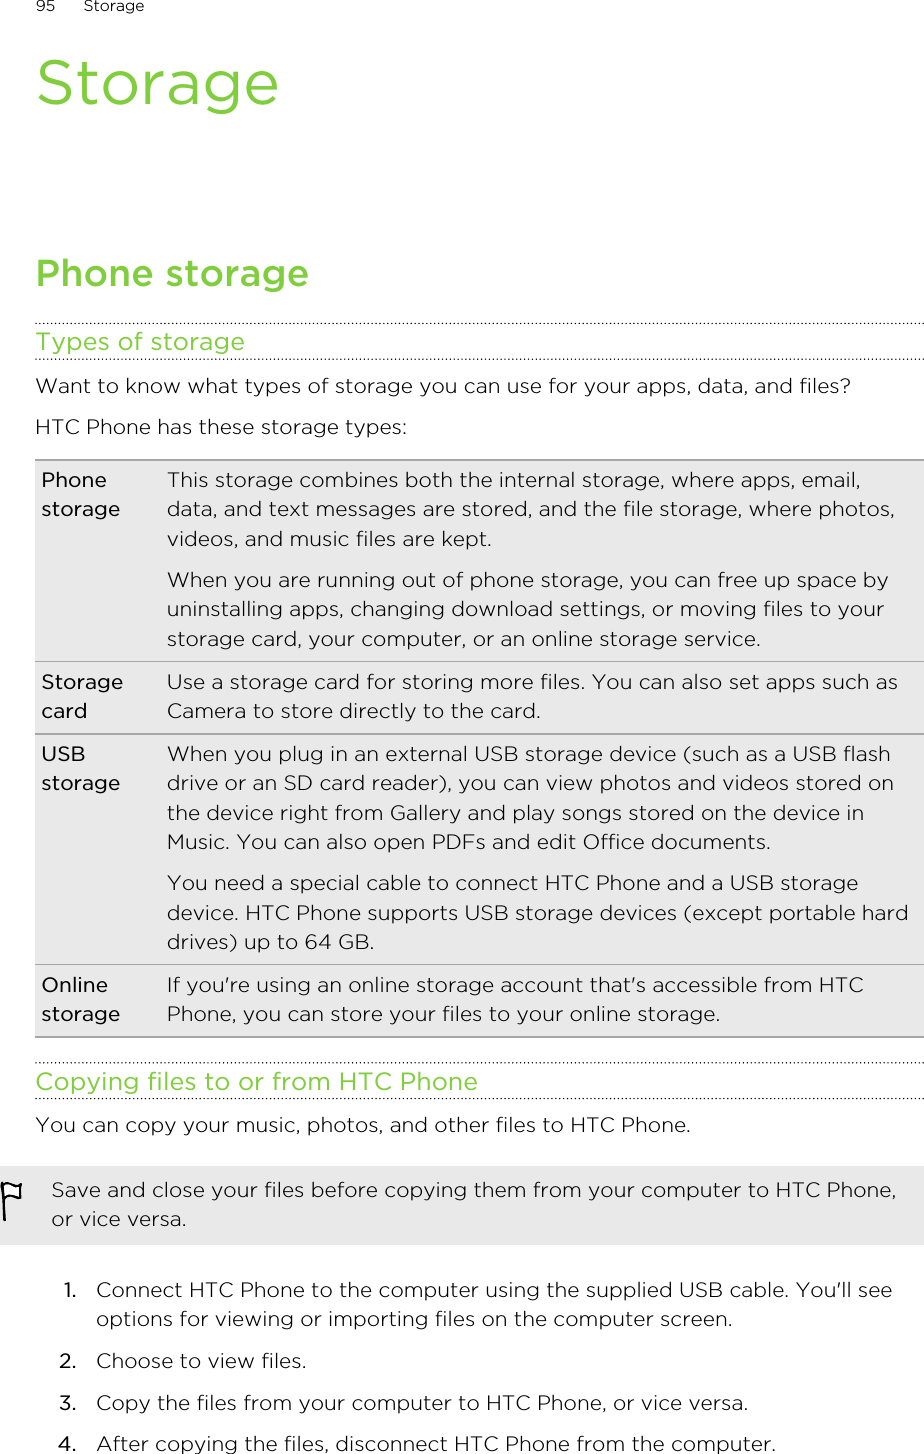 StoragePhone storageTypes of storageWant to know what types of storage you can use for your apps, data, and files?HTC Phone has these storage types:PhonestorageThis storage combines both the internal storage, where apps, email,data, and text messages are stored, and the file storage, where photos,videos, and music files are kept.When you are running out of phone storage, you can free up space byuninstalling apps, changing download settings, or moving files to yourstorage card, your computer, or an online storage service.StoragecardUse a storage card for storing more files. You can also set apps such asCamera to store directly to the card.USBstorageWhen you plug in an external USB storage device (such as a USB flashdrive or an SD card reader), you can view photos and videos stored onthe device right from Gallery and play songs stored on the device inMusic. You can also open PDFs and edit Office documents.You need a special cable to connect HTC Phone and a USB storagedevice. HTC Phone supports USB storage devices (except portable harddrives) up to 64 GB.OnlinestorageIf you&apos;re using an online storage account that&apos;s accessible from HTCPhone, you can store your files to your online storage.Copying files to or from HTC PhoneYou can copy your music, photos, and other files to HTC Phone.Save and close your files before copying them from your computer to HTC Phone,or vice versa.1. Connect HTC Phone to the computer using the supplied USB cable. You&apos;ll seeoptions for viewing or importing files on the computer screen.2. Choose to view files.3. Copy the files from your computer to HTC Phone, or vice versa.4. After copying the files, disconnect HTC Phone from the computer.95 StorageHTC Confidential for Certification HTC Confidential for Certification 